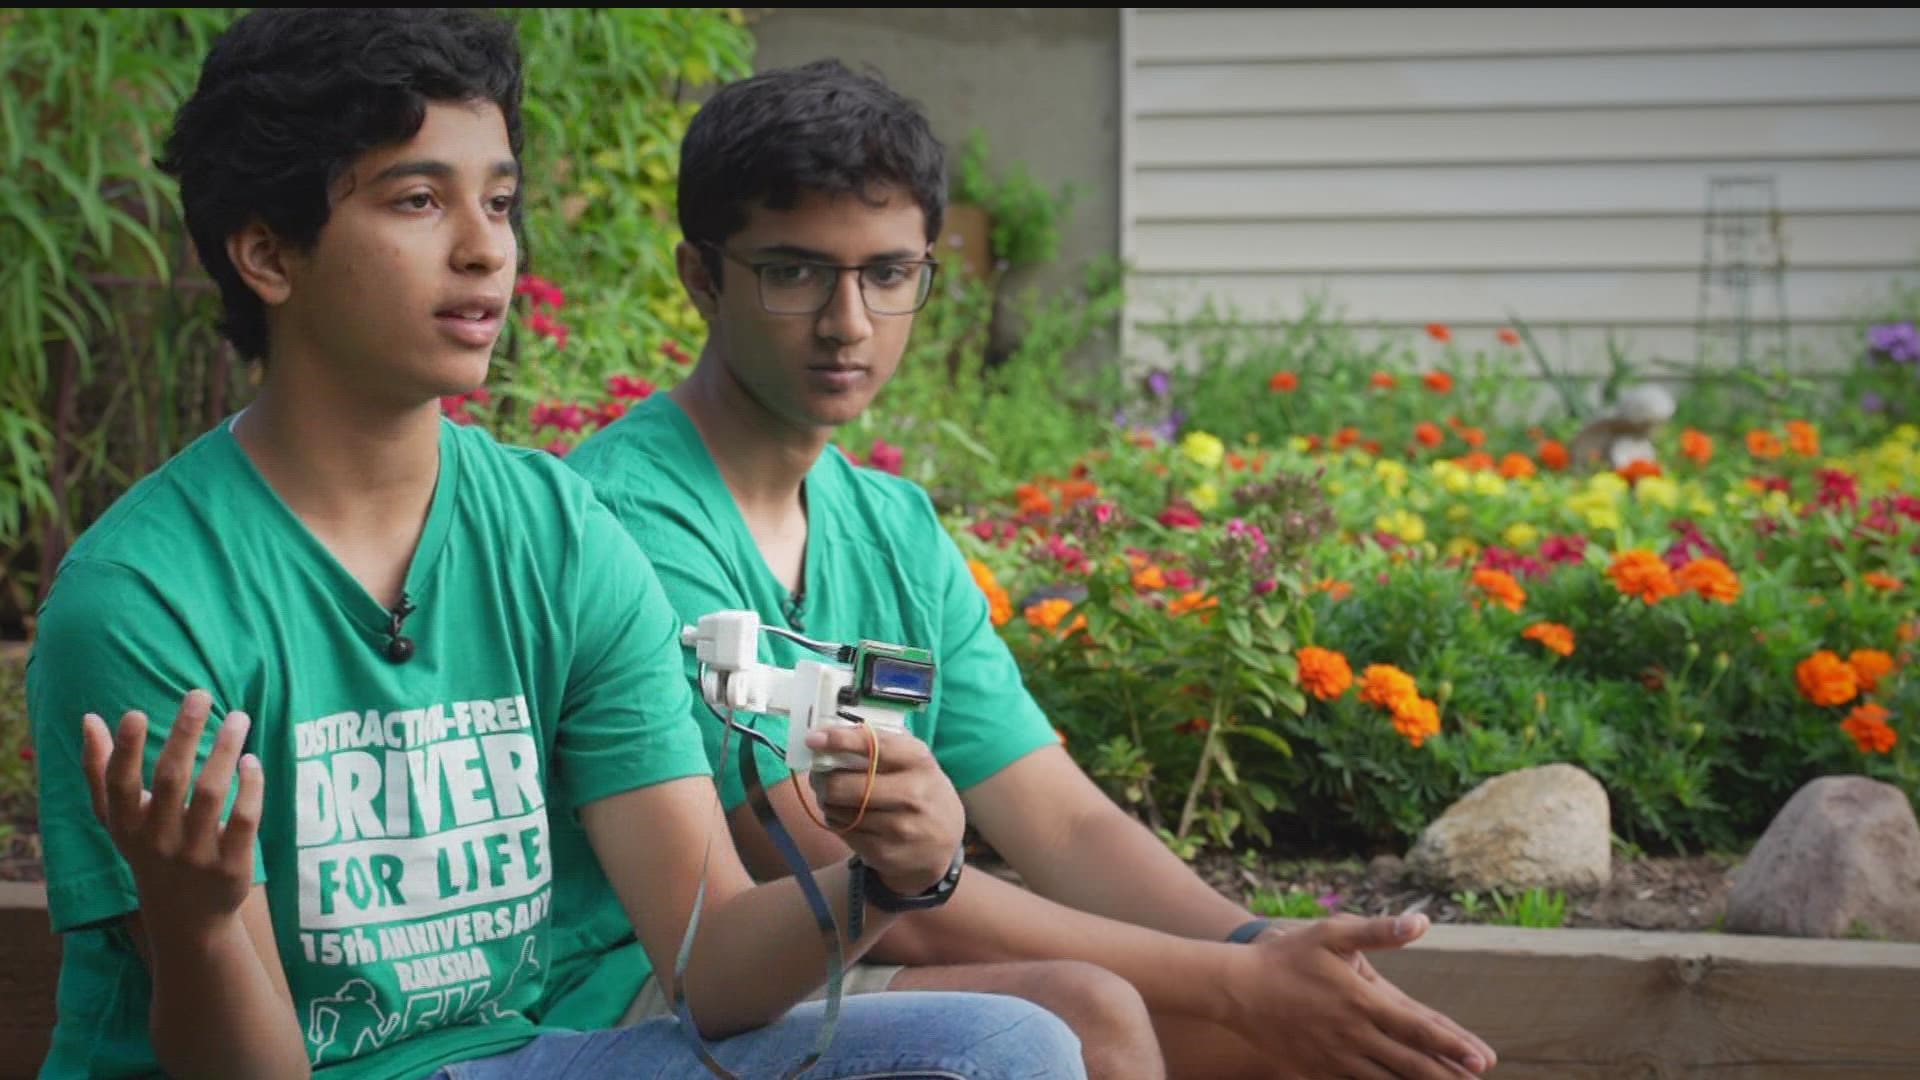 The students have the best reply for how they spent their summer: They invented a device to help curb distracted drivers.